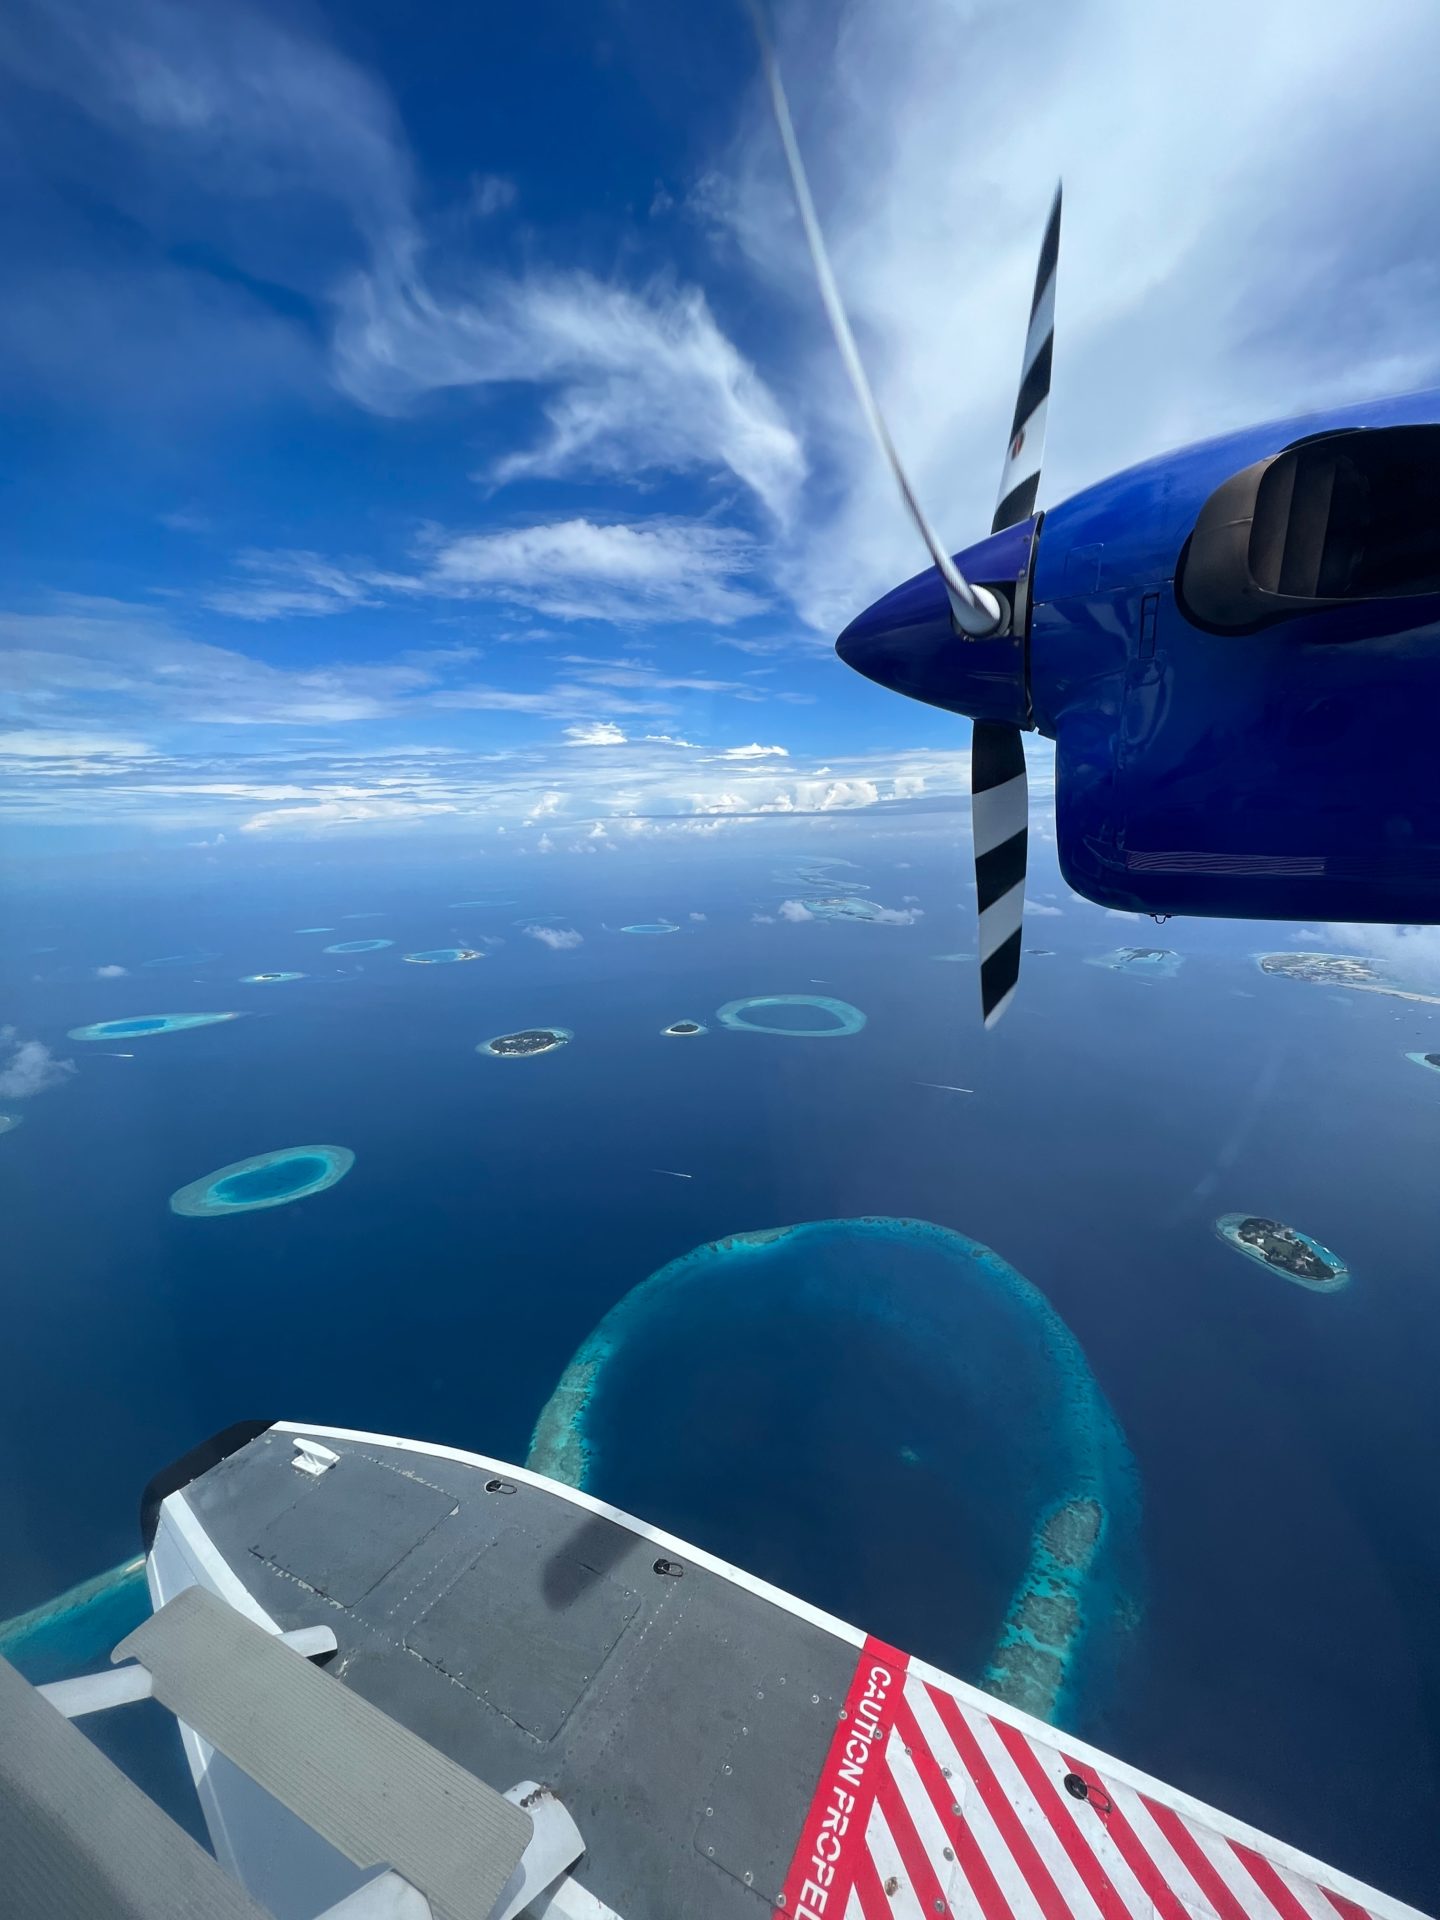 Views of the Maldives through the window of a sea plane